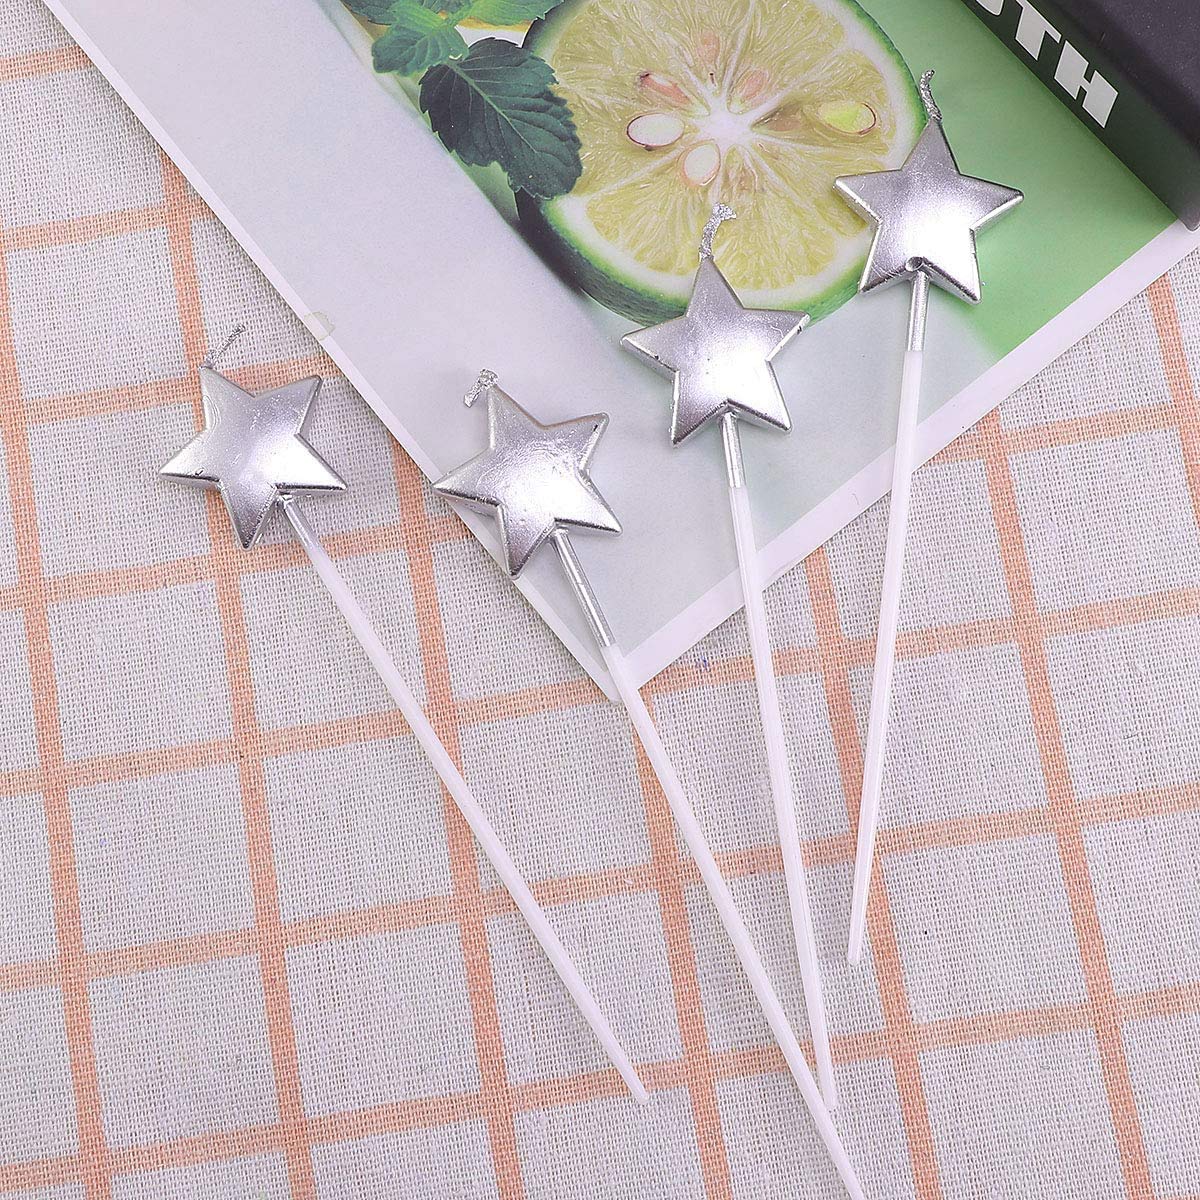 Silver Star Shape Long Stick Candle Metallic Cake Cupcake Candles Cake Candles for Birthday, Wedding Party and Cake Decoration Pack of 4